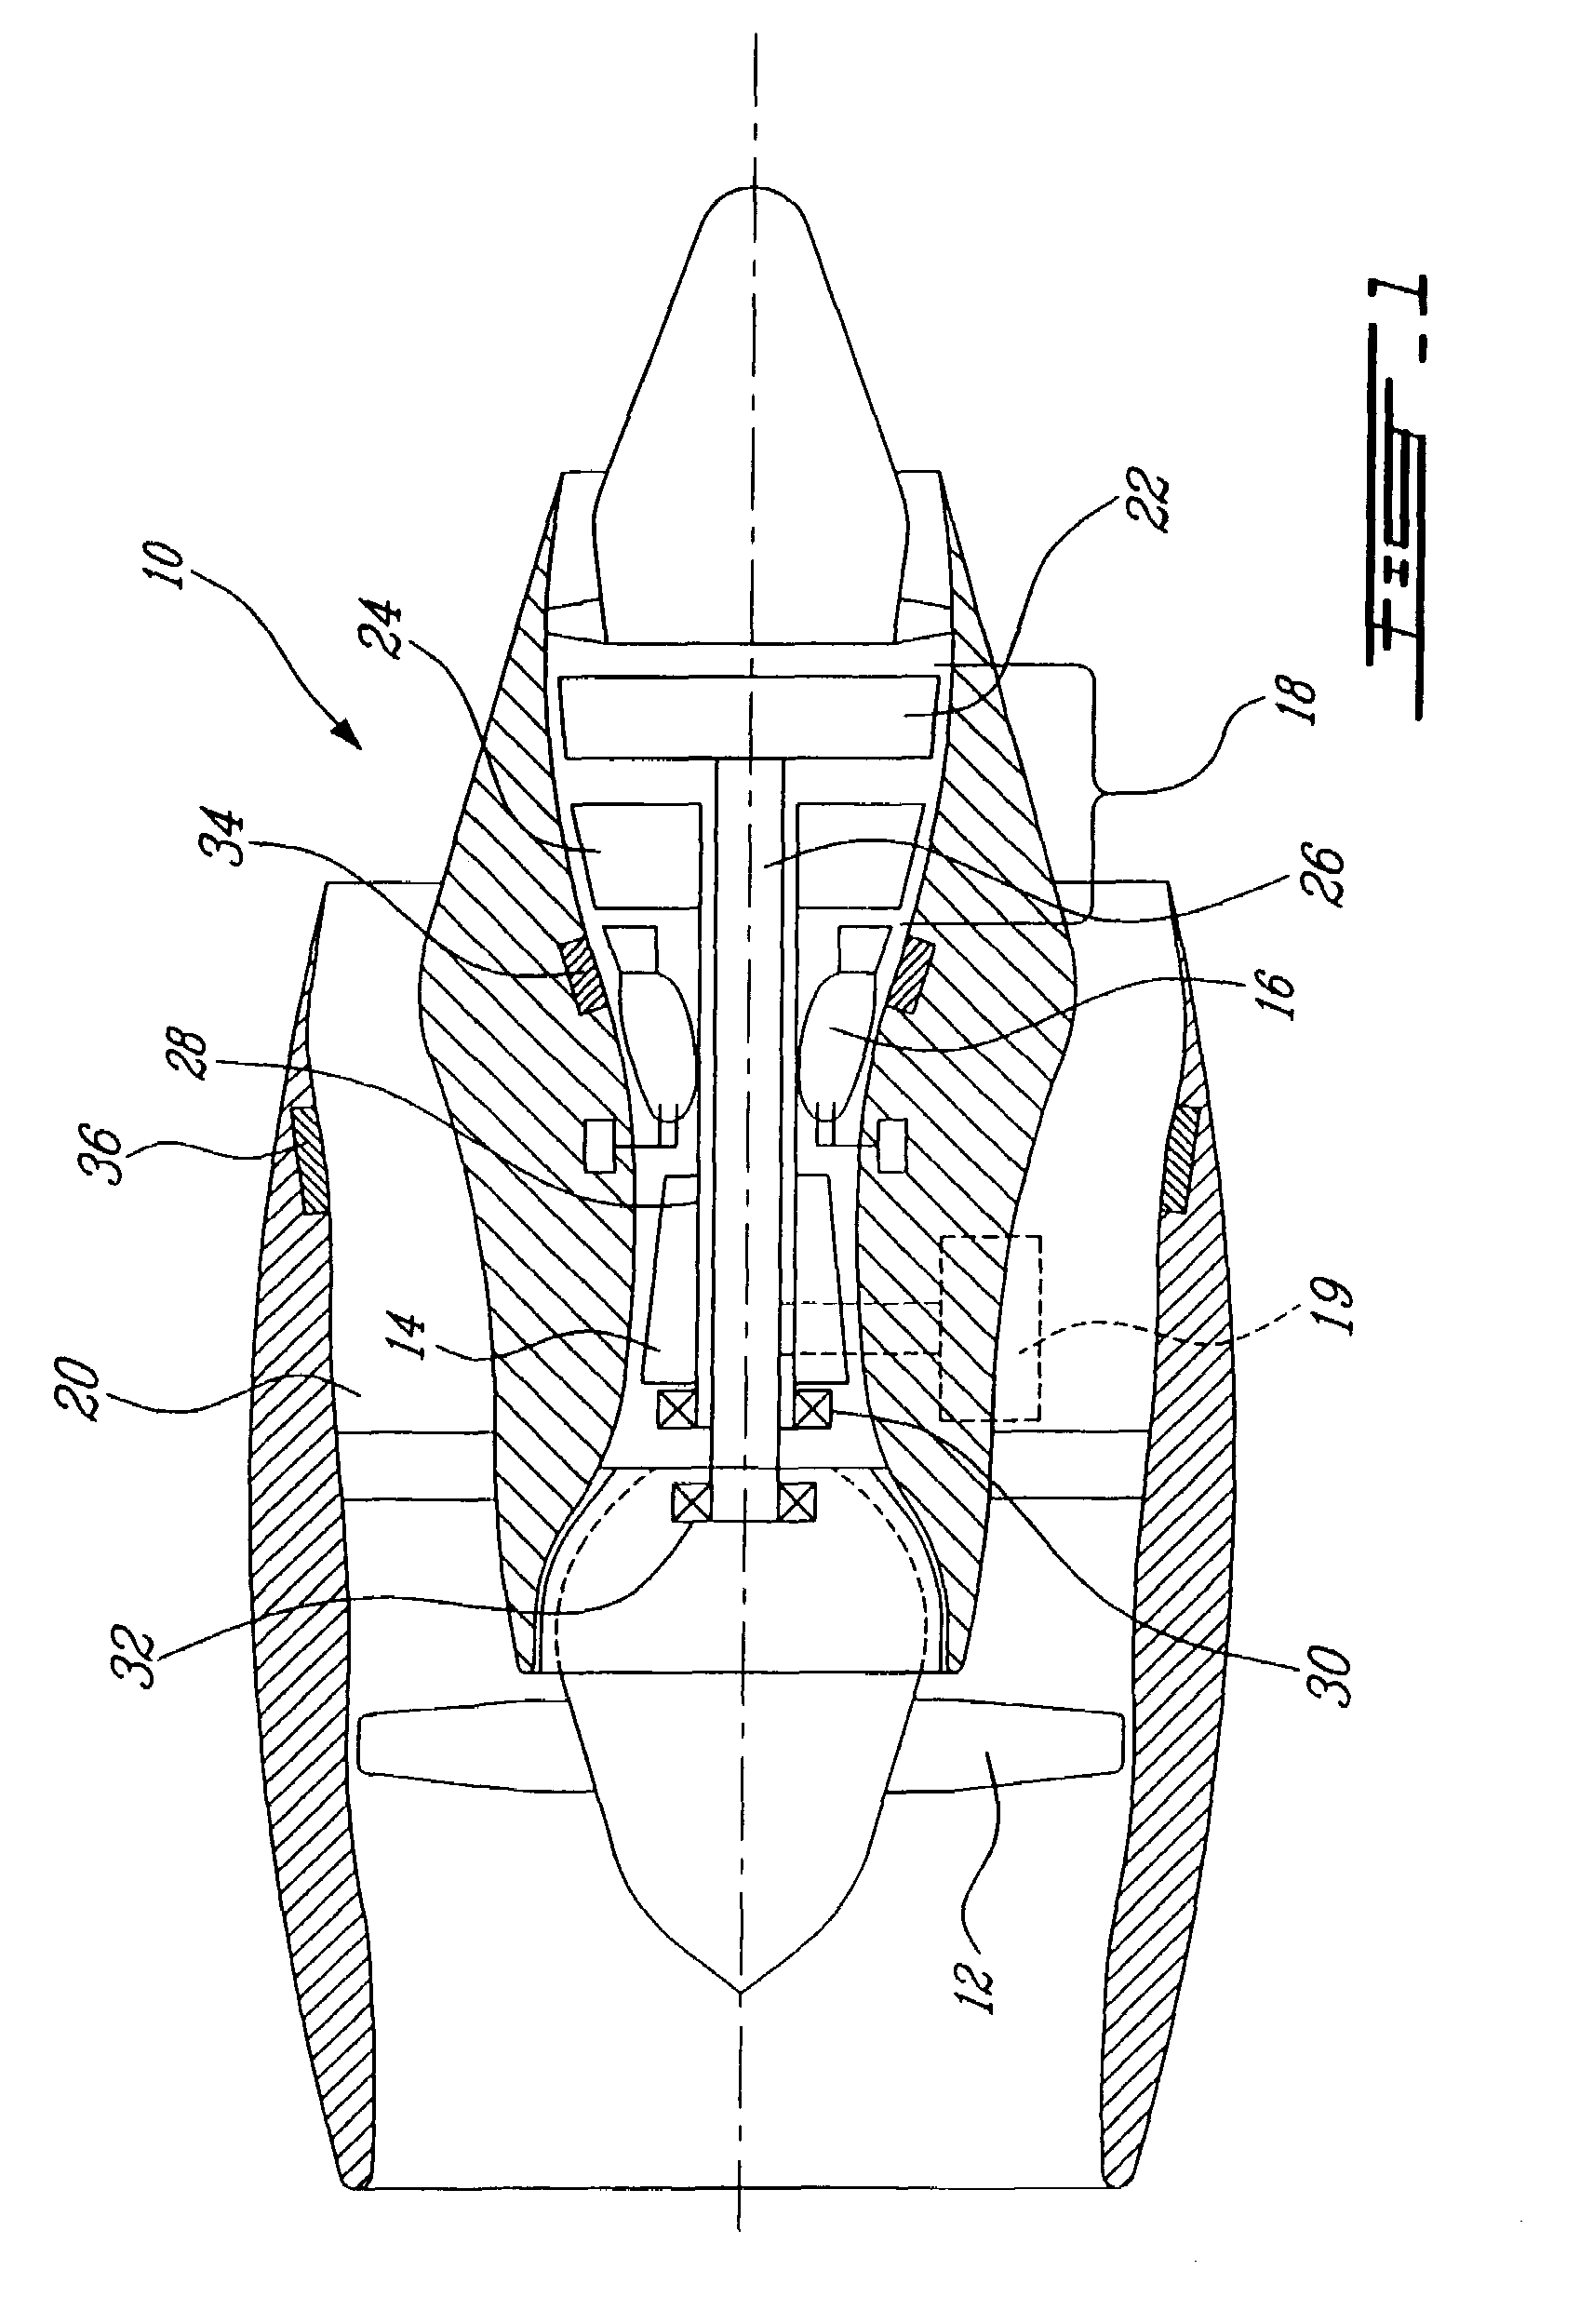 Gas turbine engine including apparatus to transfer power between multiple shafts